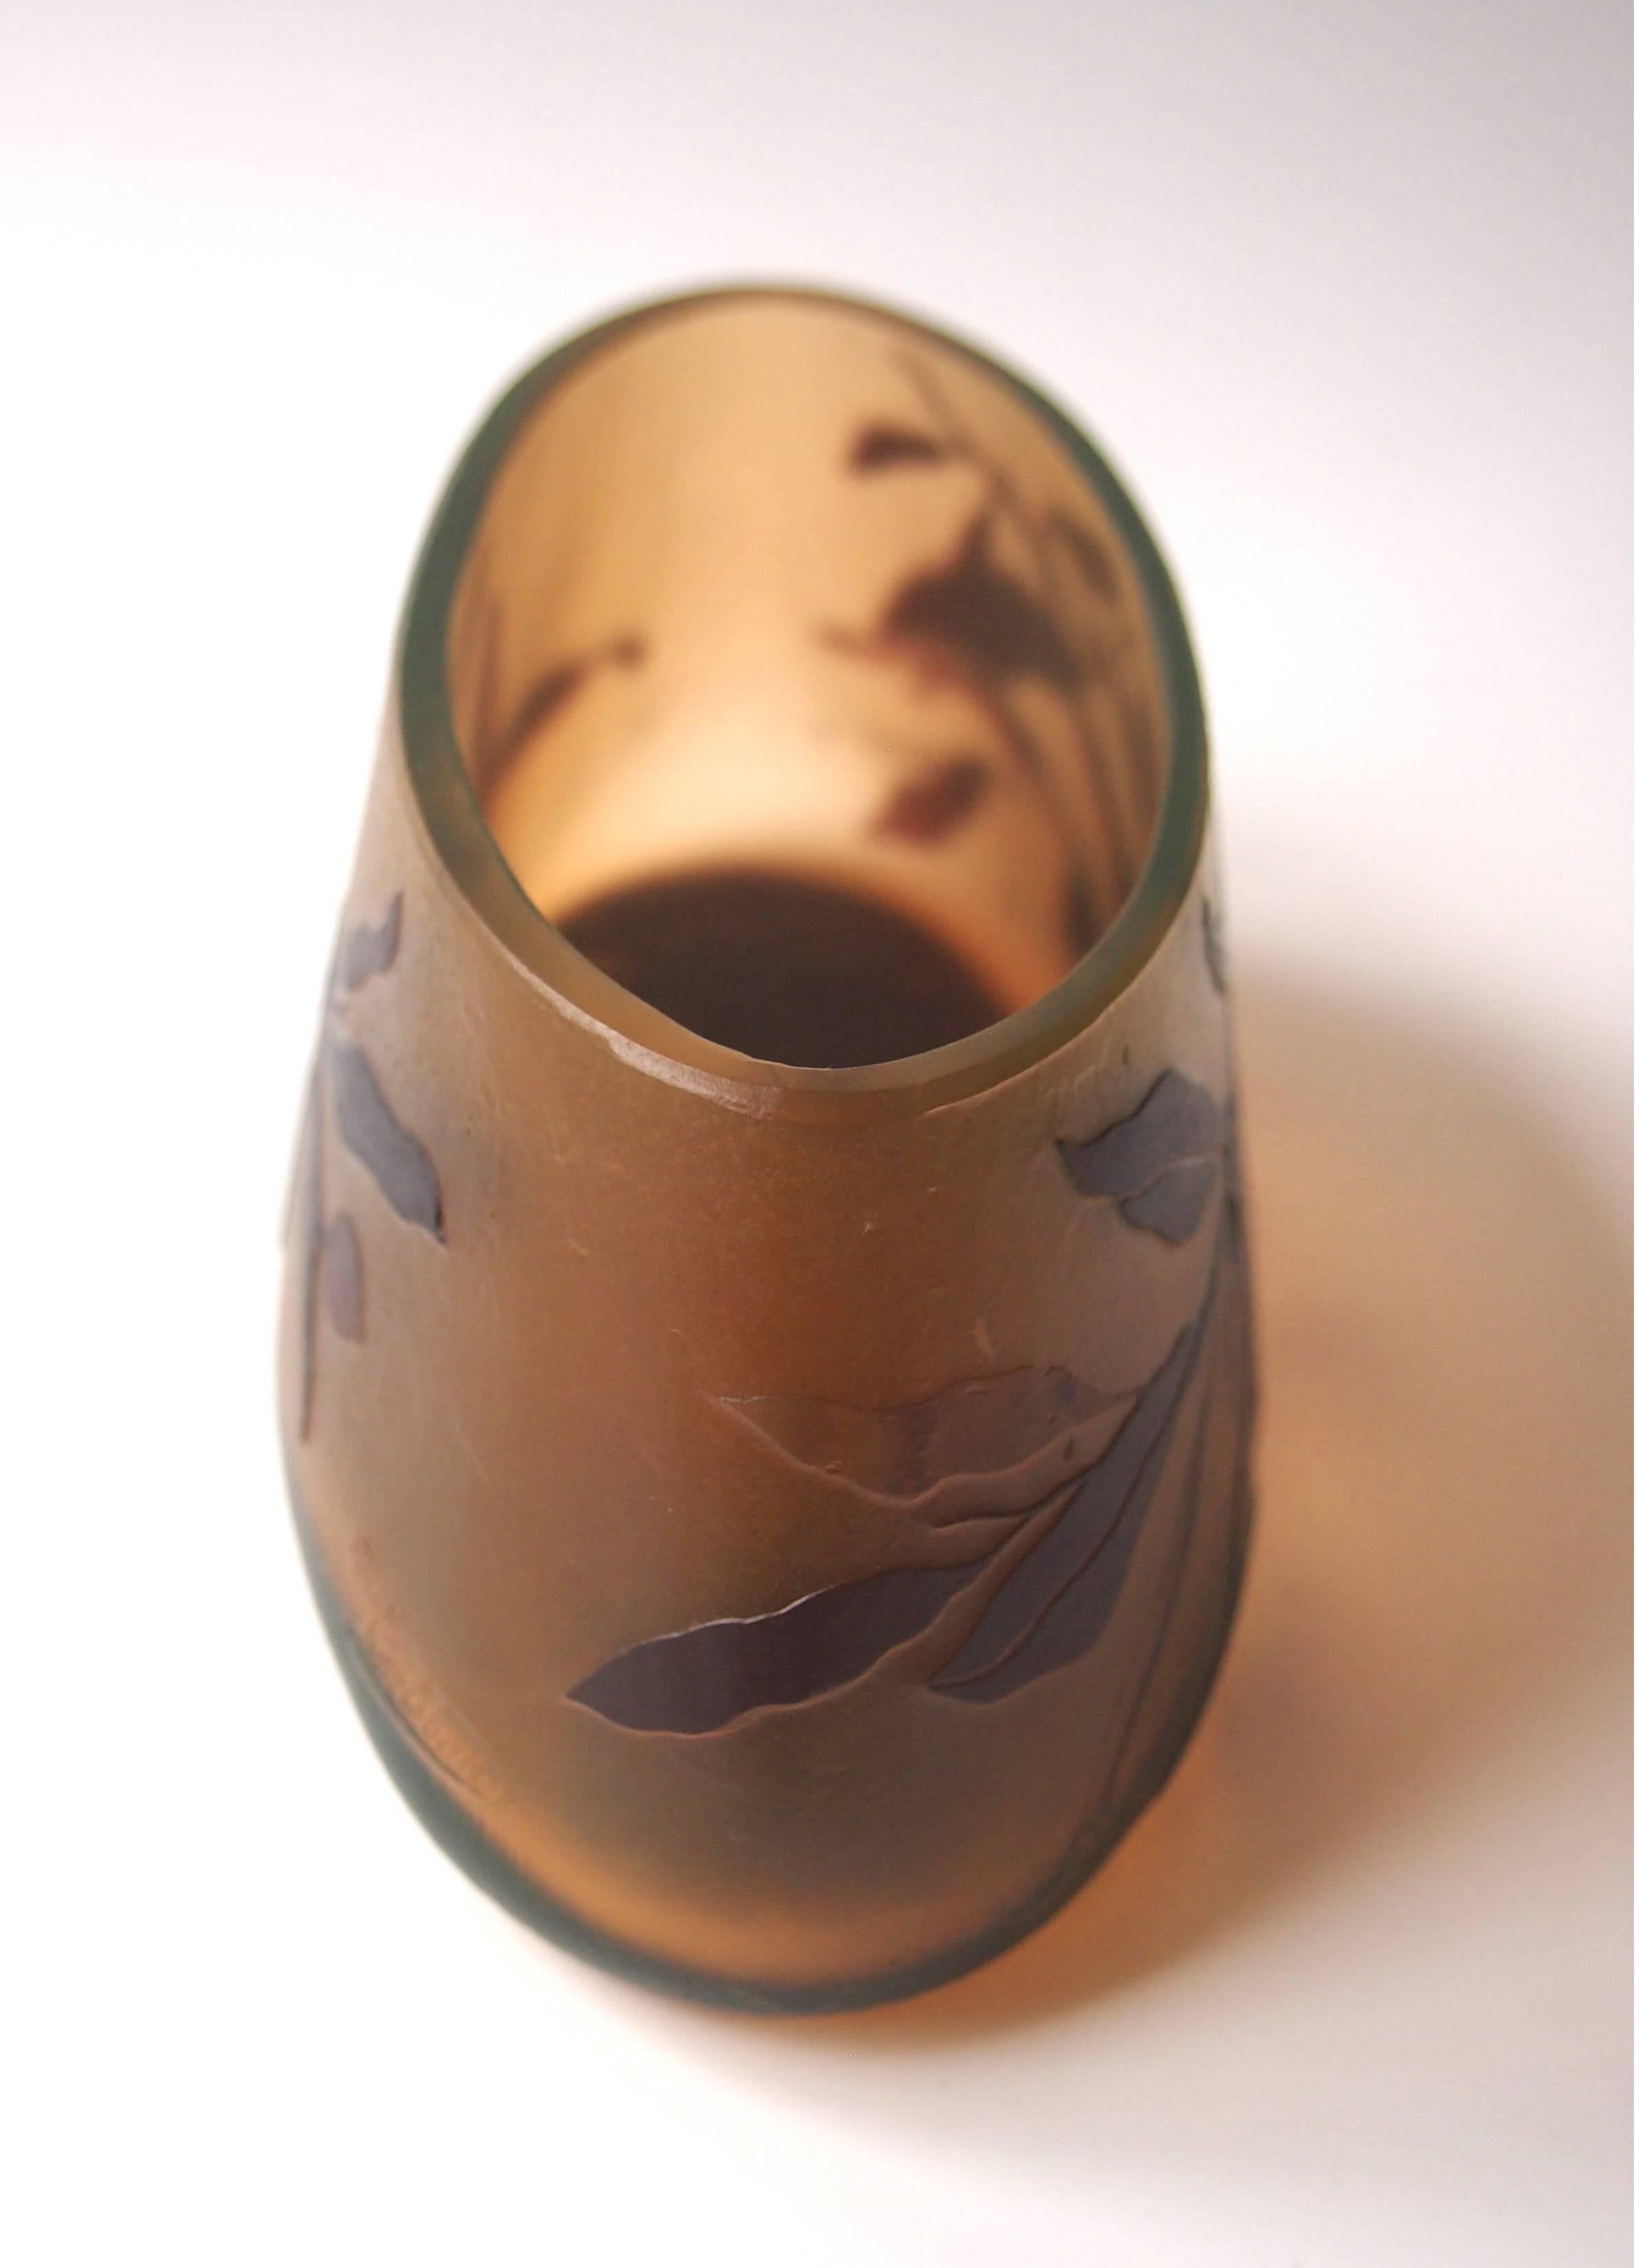 Very rare Moser Art Nouveau cameo vase depicting branches and berries designed by the Viennese Painter Otto Tauscek in brown glass over orange and uranium green -signed twice in cameo MK and Moser Karlsbad -see images 8 and 9. Moser only briefly